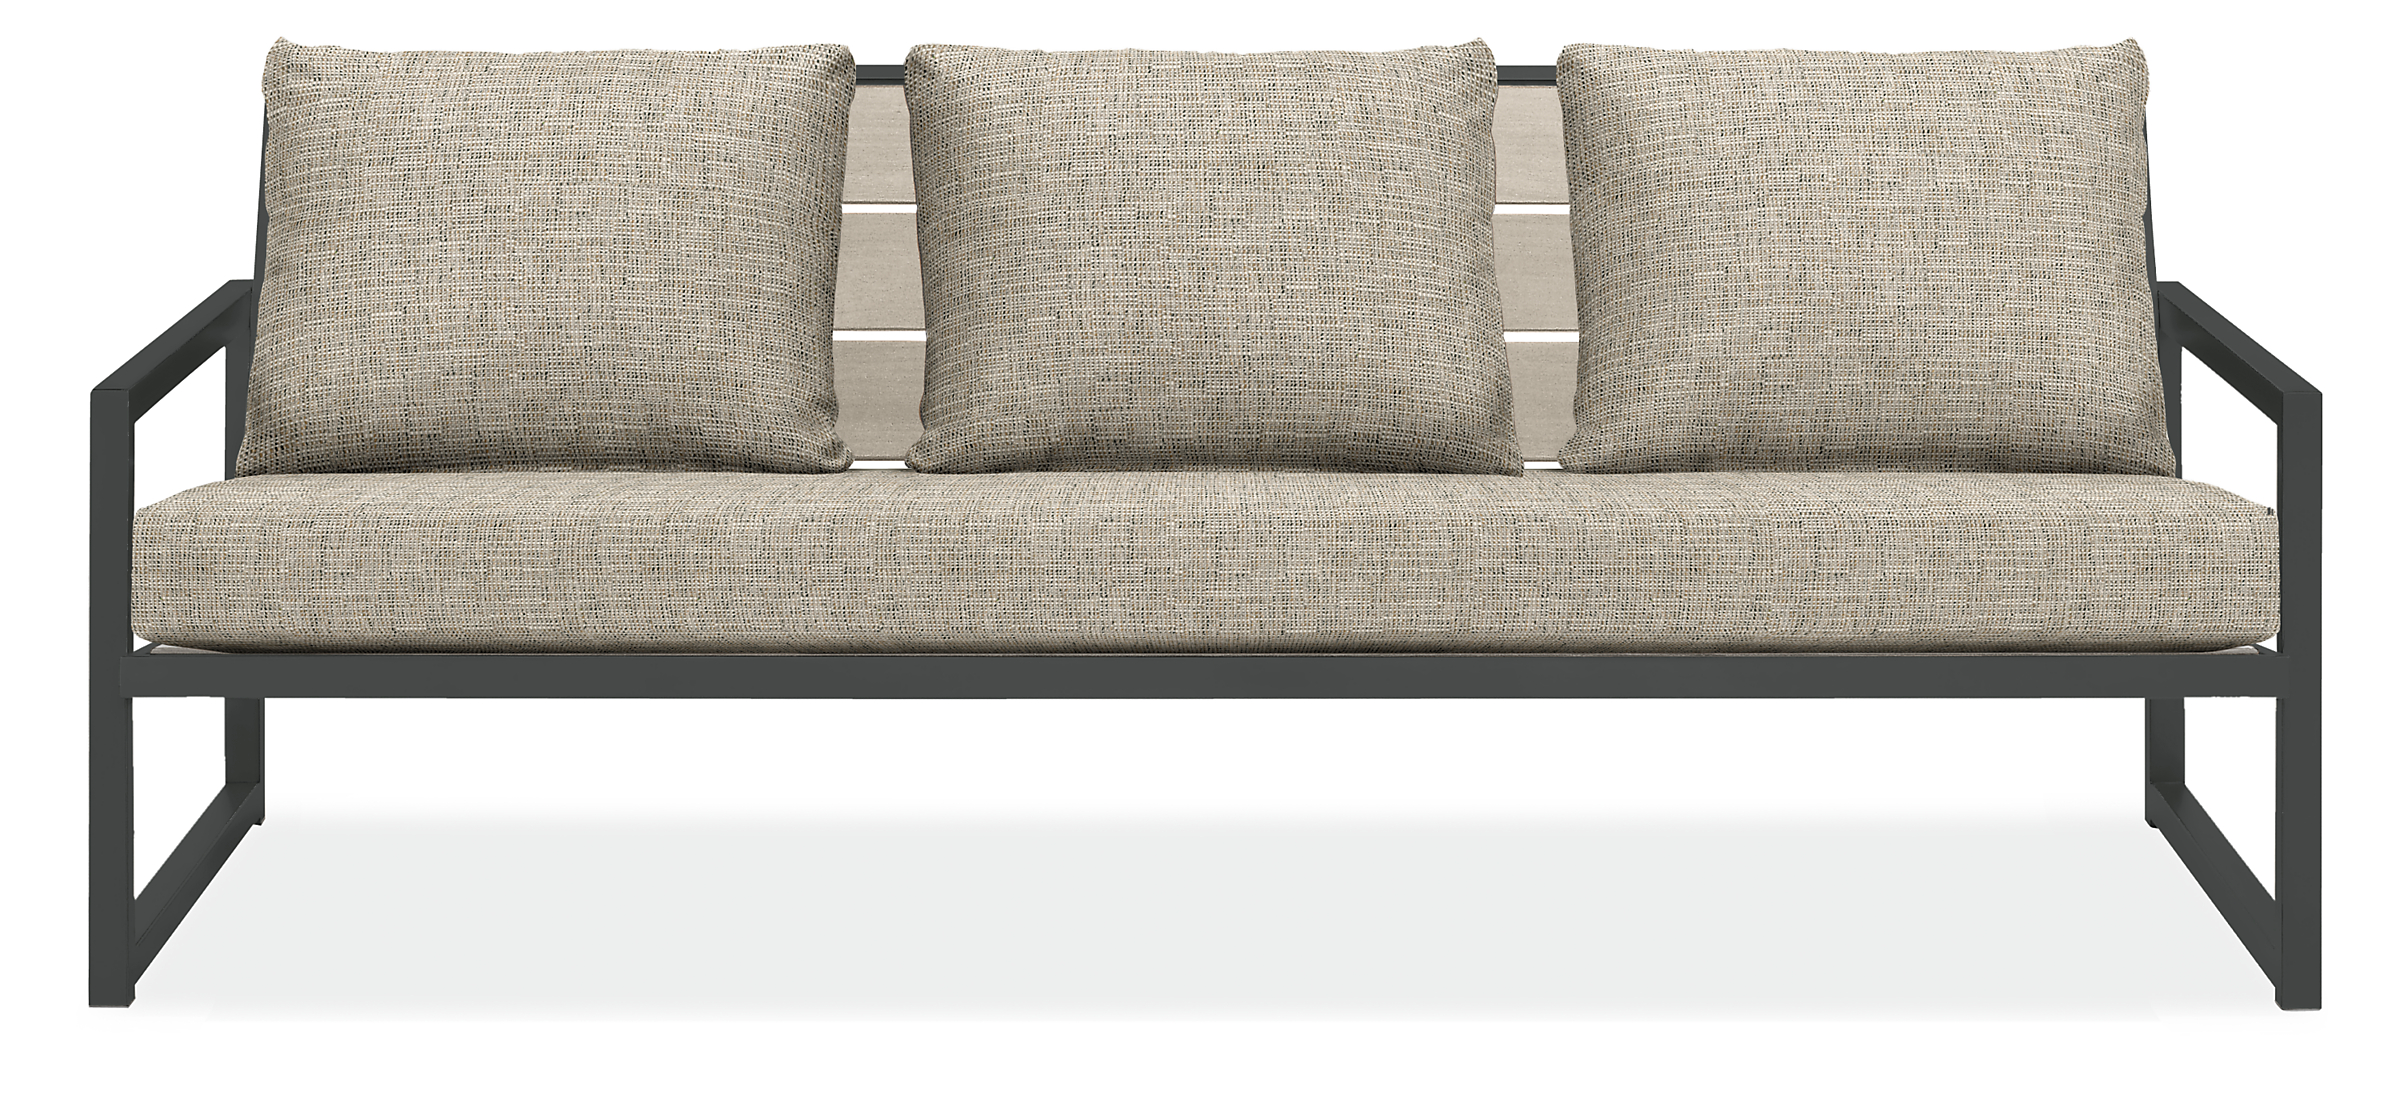 Montego 80" Sofa in Thermally Modified Ash with Cushions